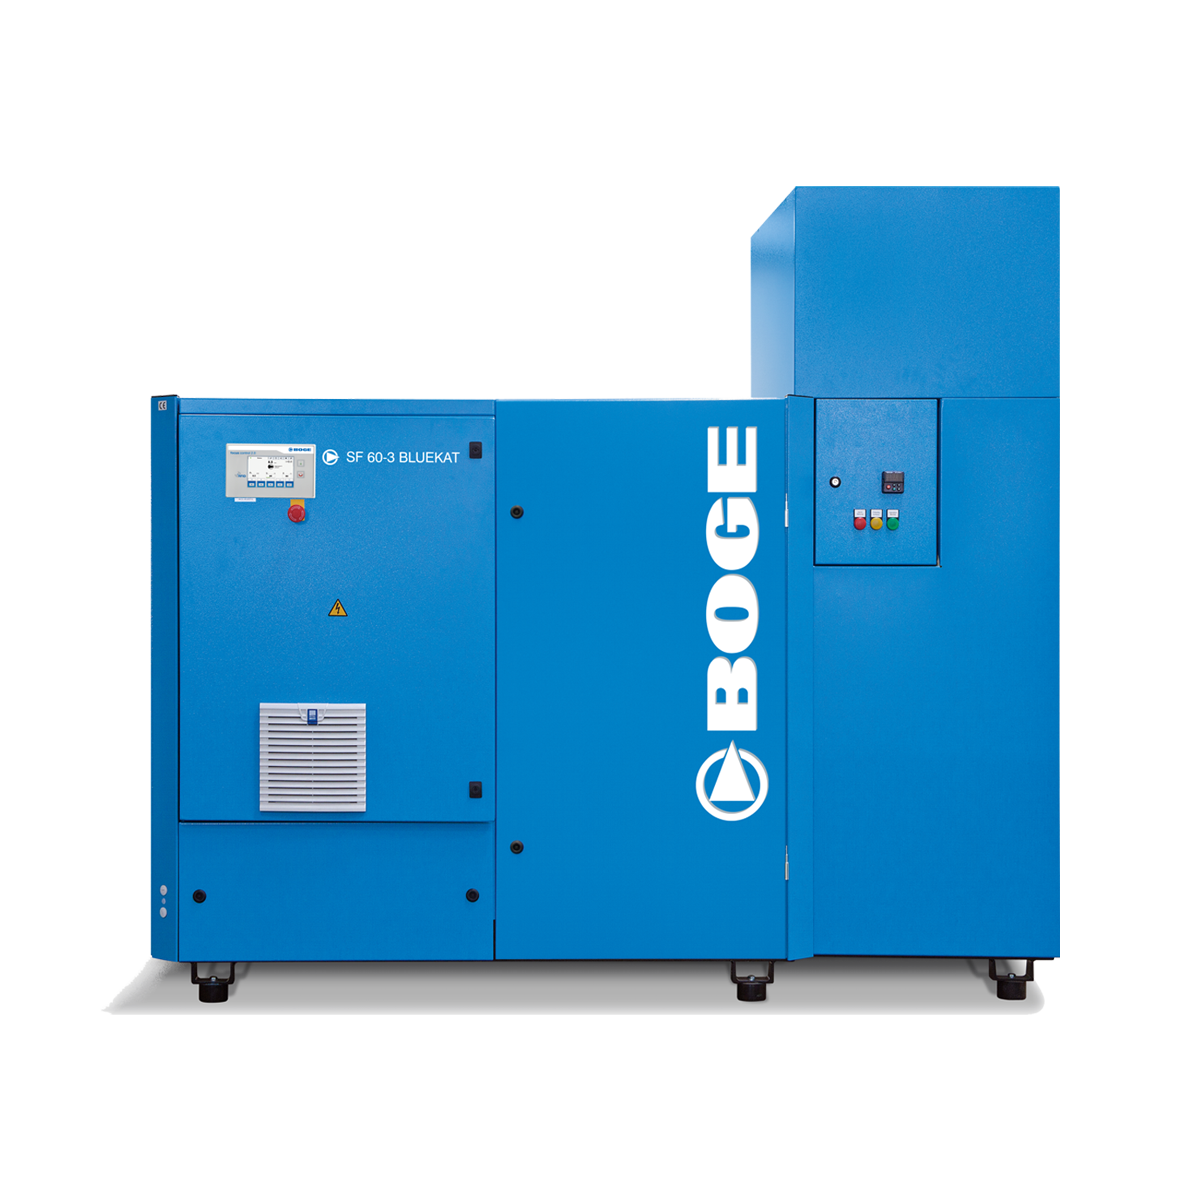 The BOGE BLUEKAT Series produces Class 0 quality oil-free compressed air